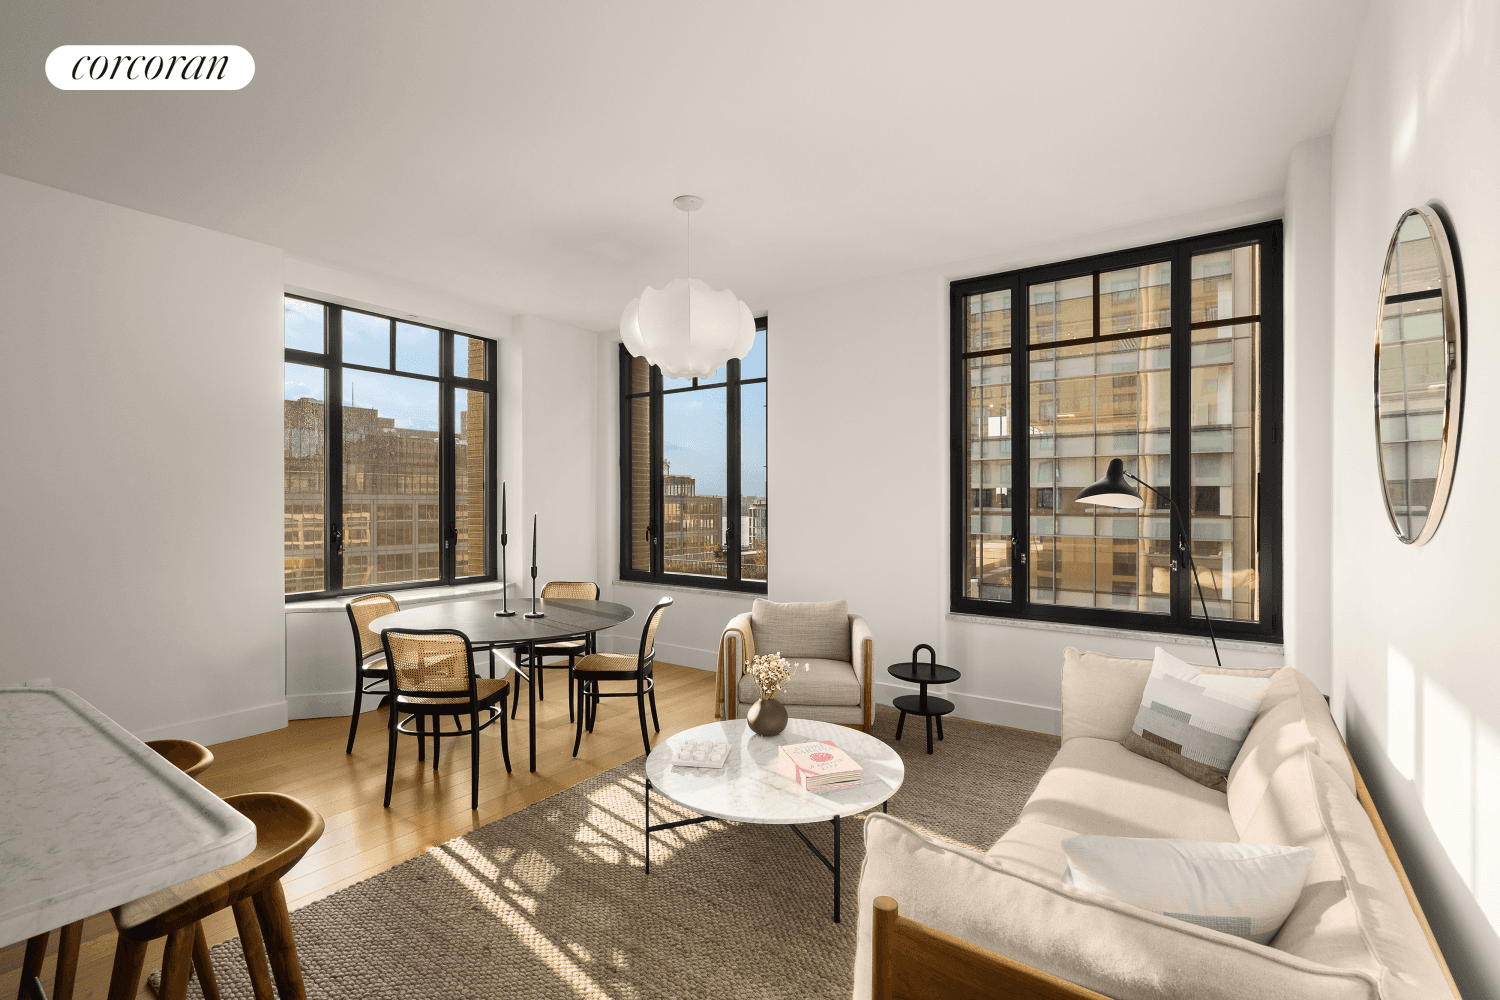 Over 90 Sold ! Immediate OccupancyResidence 20D at Greenwich West is an exceptional three bedroom two and a half bathroom condominium home which offers South, East, West, and North exposures ...